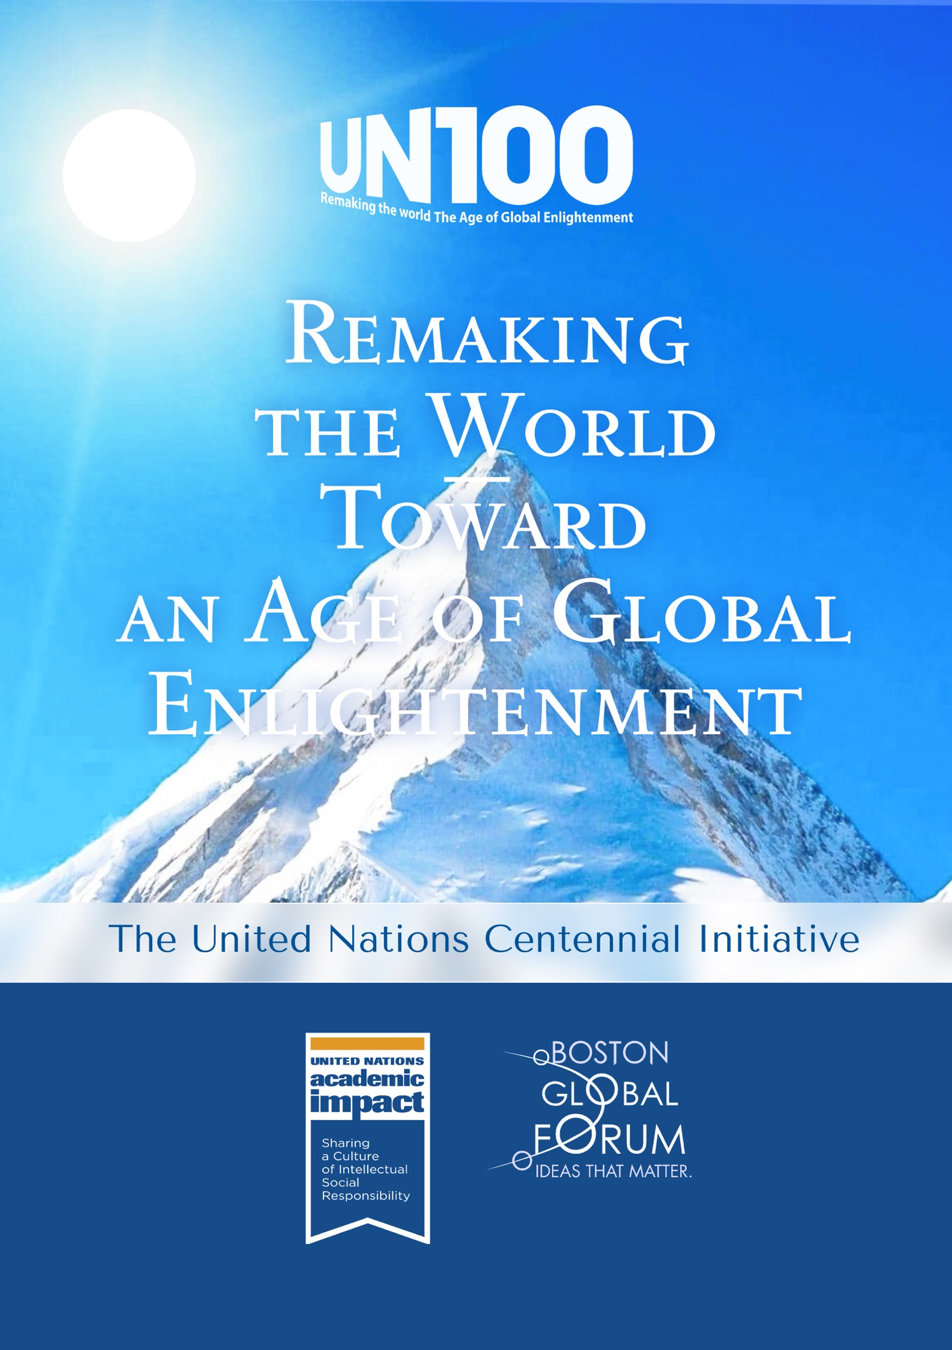 Global Enlightenment Education plays a key role in Remaking the World – Towards an Age of Global Enlightenment